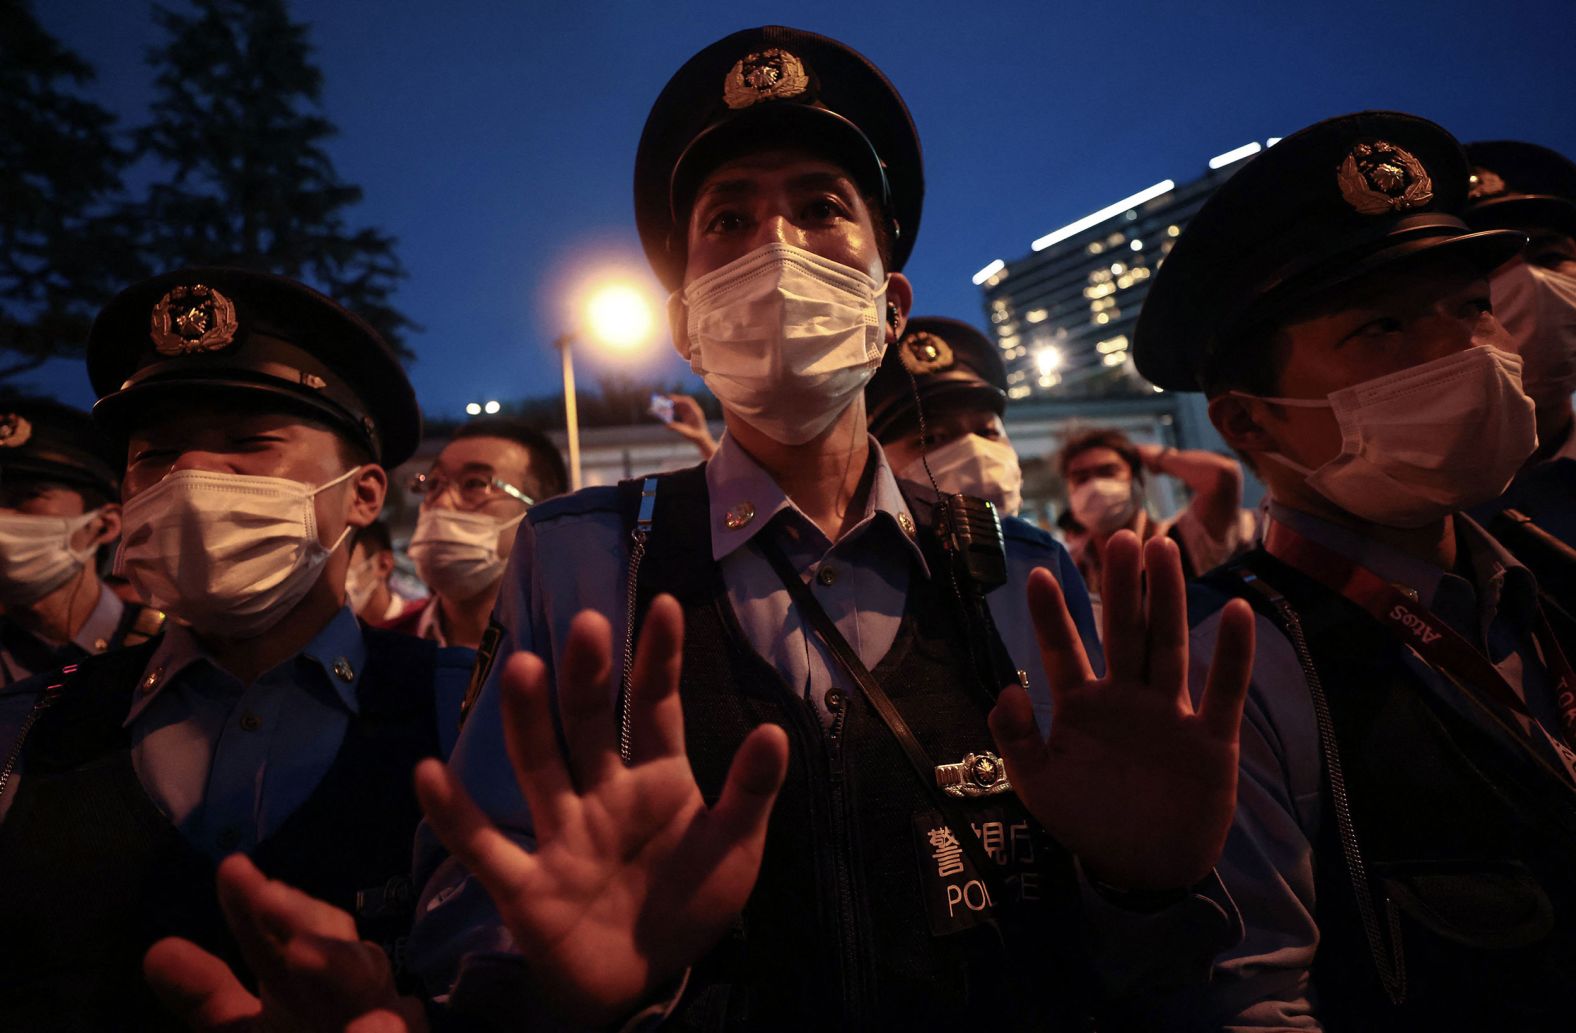 A police officer gestures toward a small group of people who were protesting the Olympics outside the stadium on July 23. A significant portion of the Japanese public <a href="index.php?page=&url=https%3A%2F%2Fwww.cnn.com%2F2021%2F07%2F22%2Fsport%2Ftokyo-olympics-preview-spt-intl%2Findex.html" target="_blank">opposes holding the Olympics in the middle of a pandemic.</a>